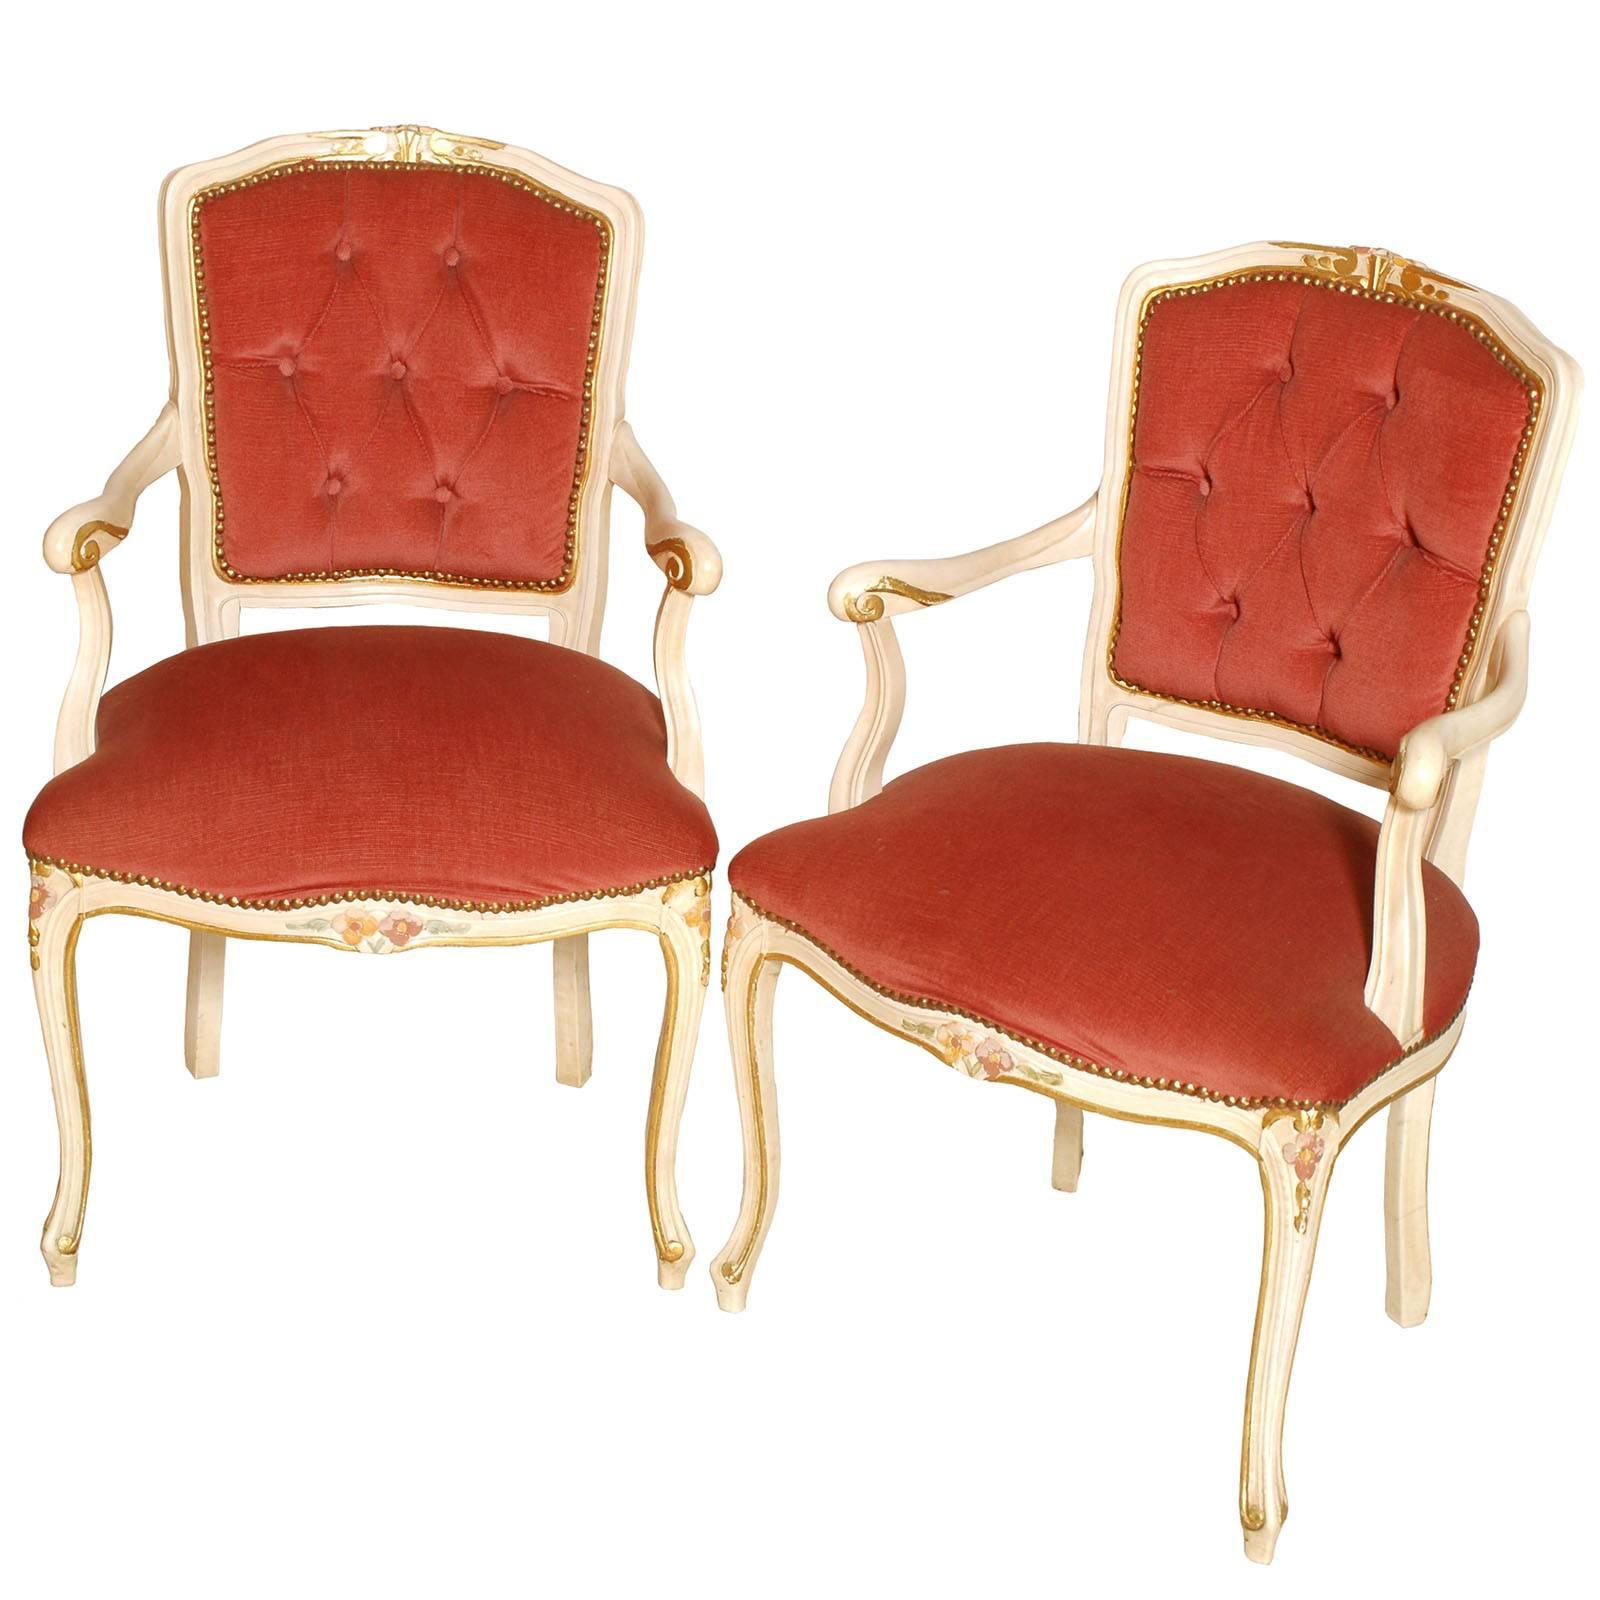 Early 20th Century Venetian Baroque Armchairs, Lacquered Pink Velvet Upholstered